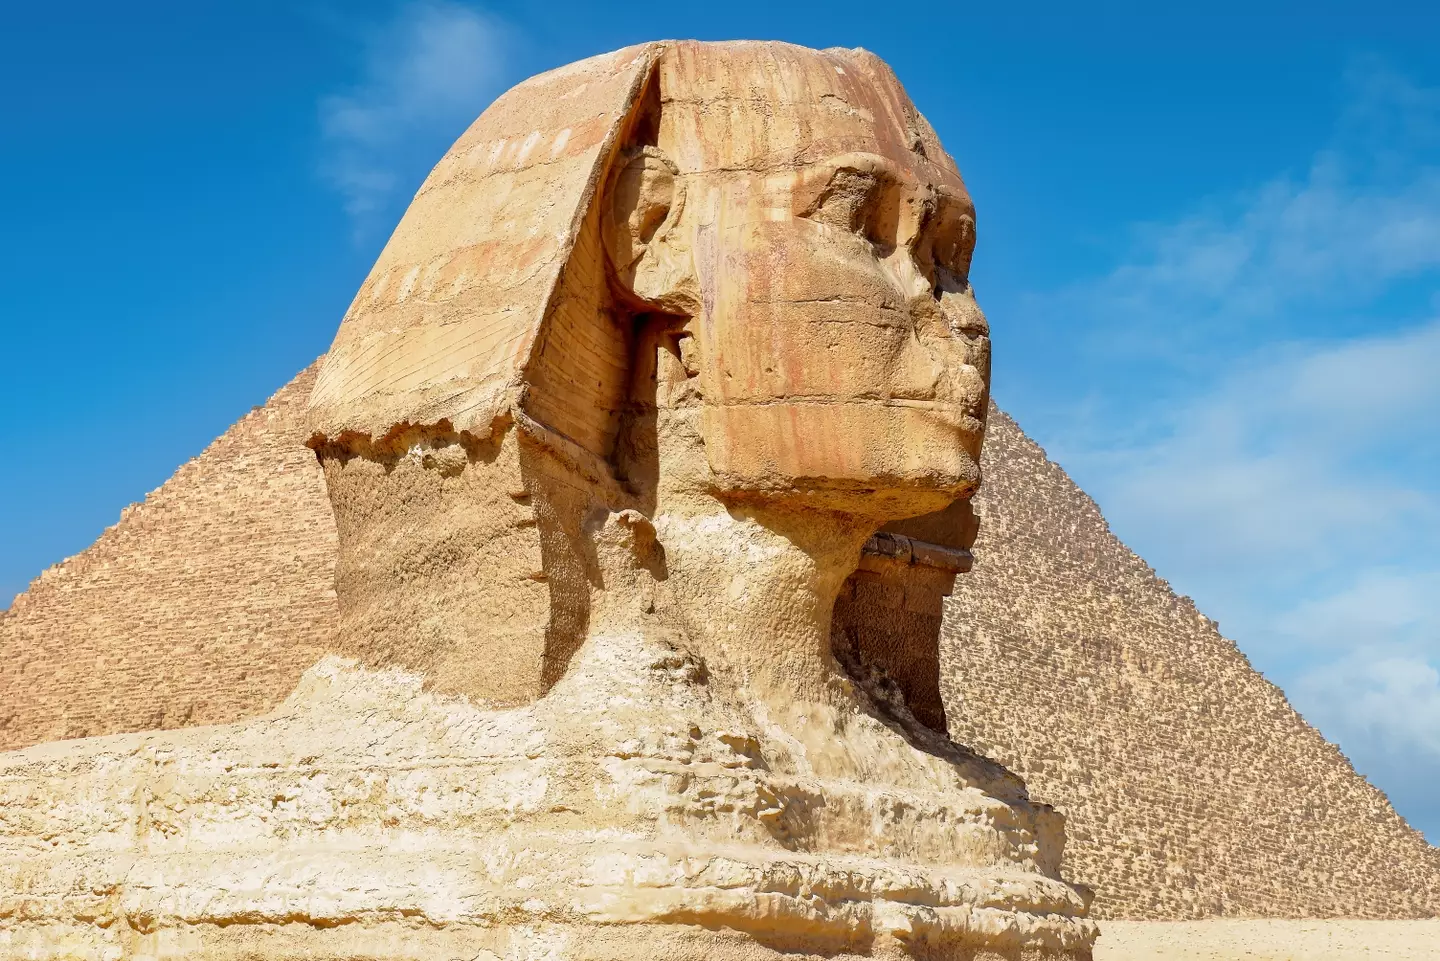 Scientists have solved the mystery of how the Sphinx was built.